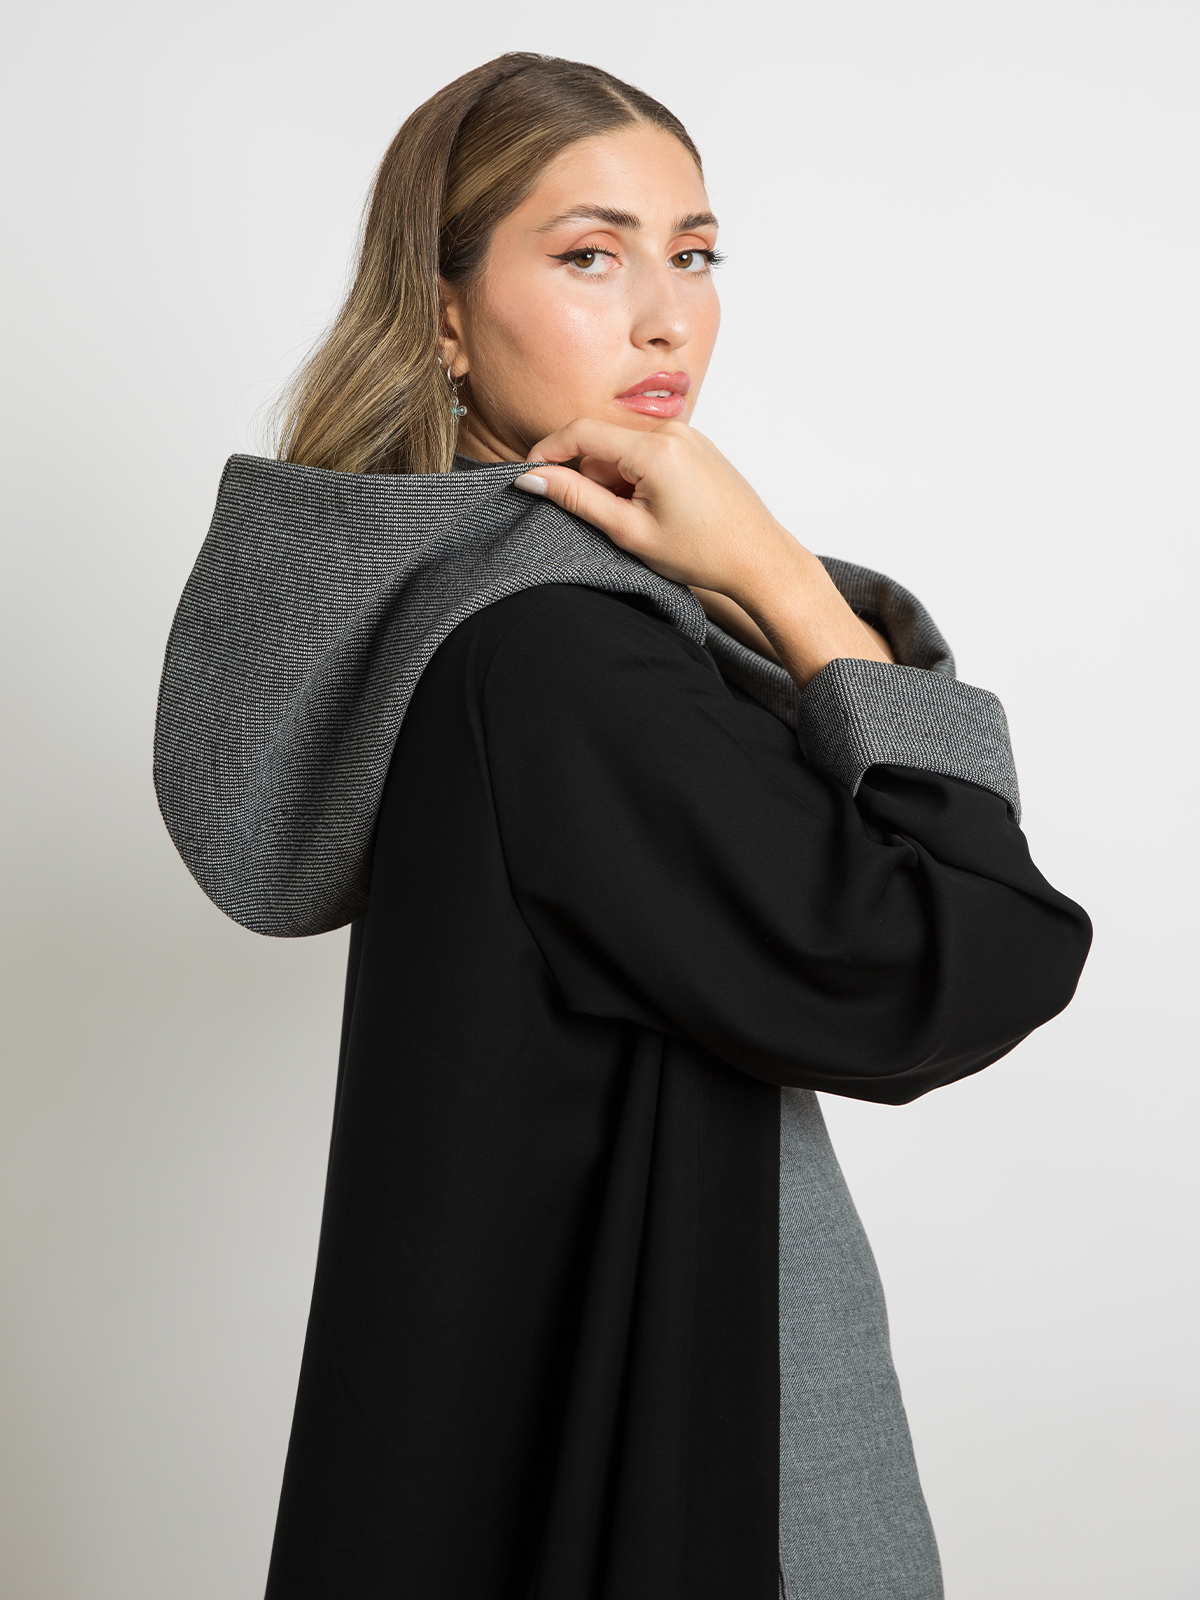 Black with gray wide regular cut long open winter fancy abaya with hoodie and rolled cuffs in fleece fabric by kaafmeem